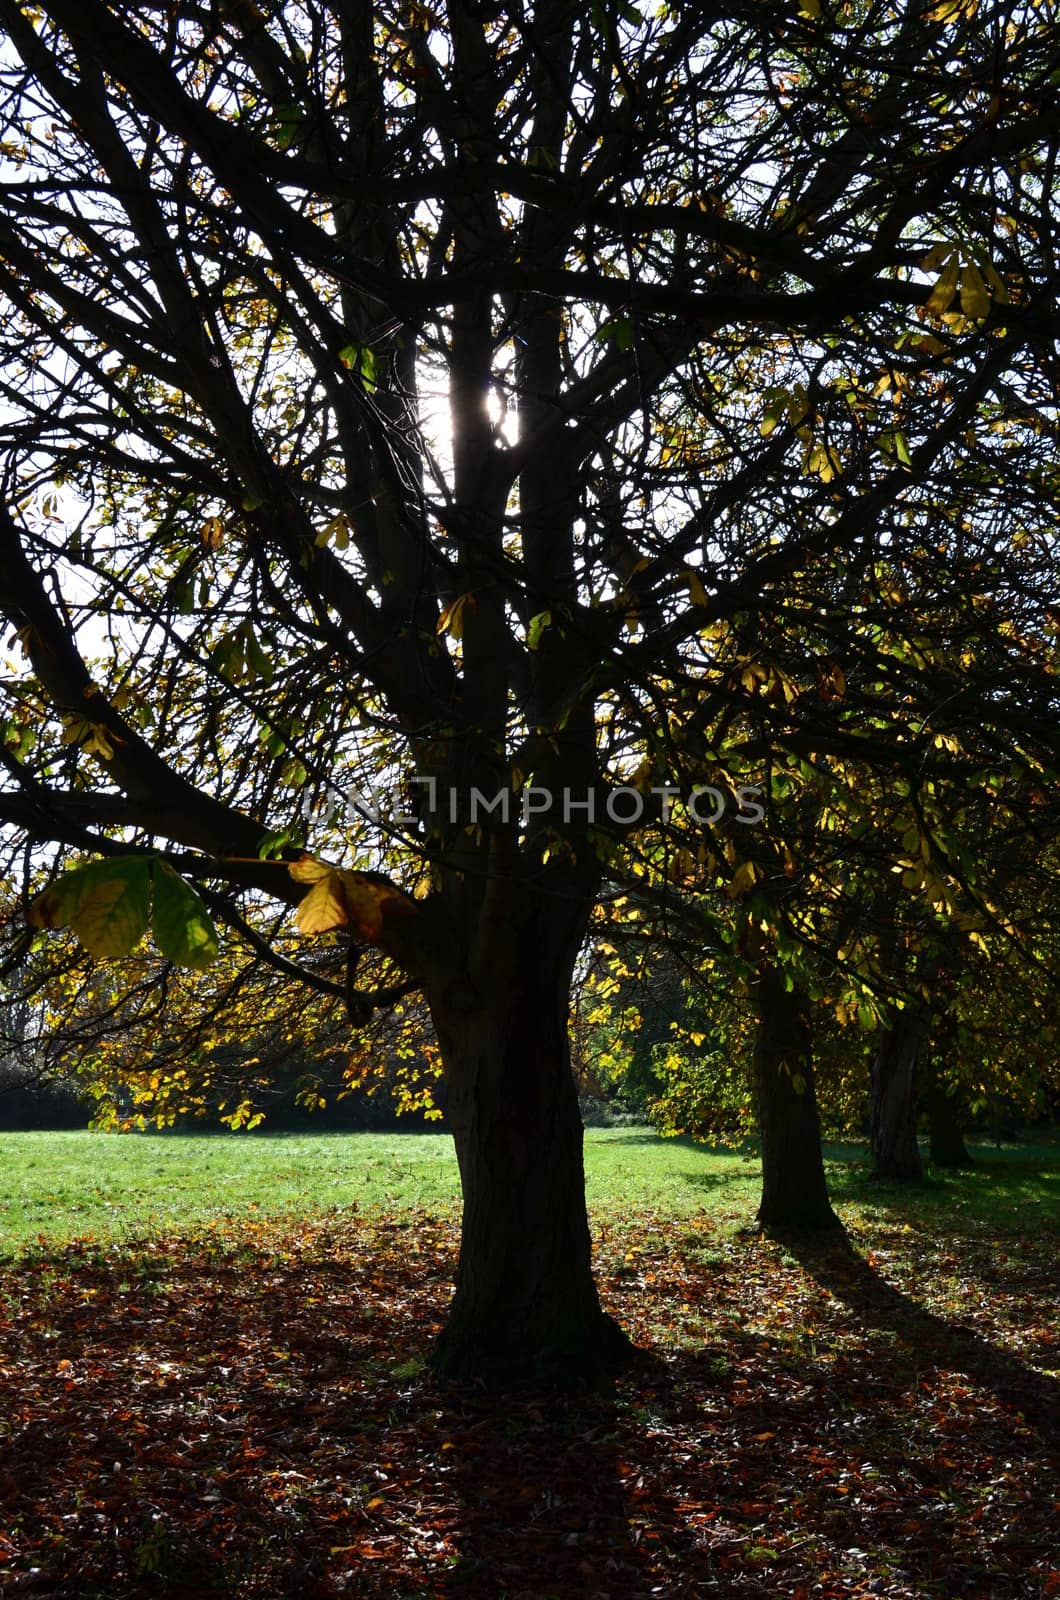 England in Autumn. by bunsview